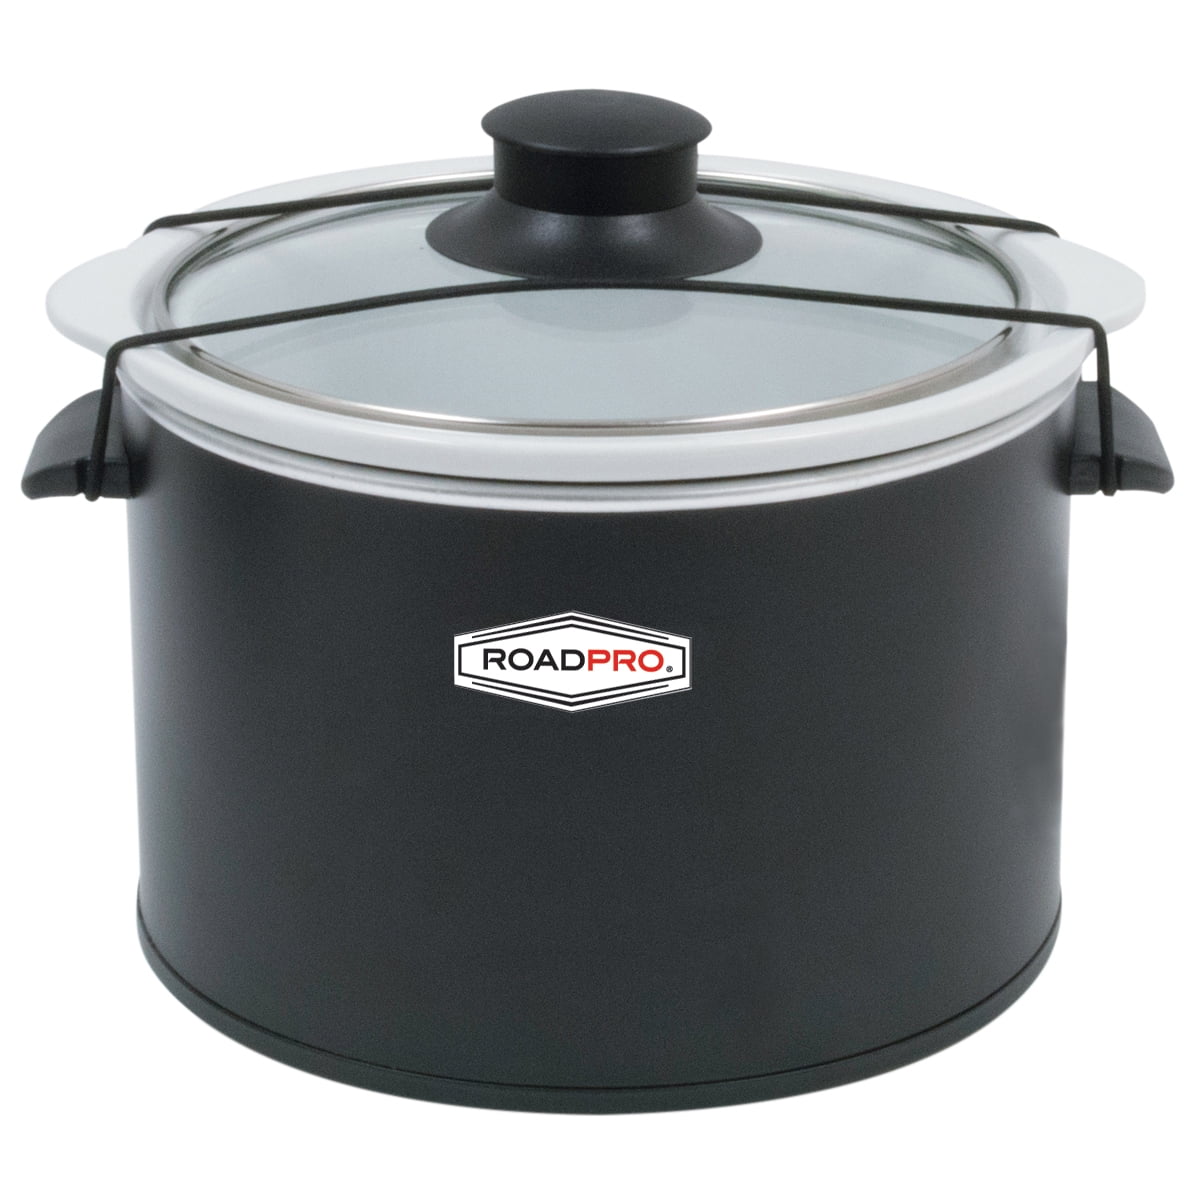 🥘🍲 This is a portable travel slow cooker. Ideal for slow cooking